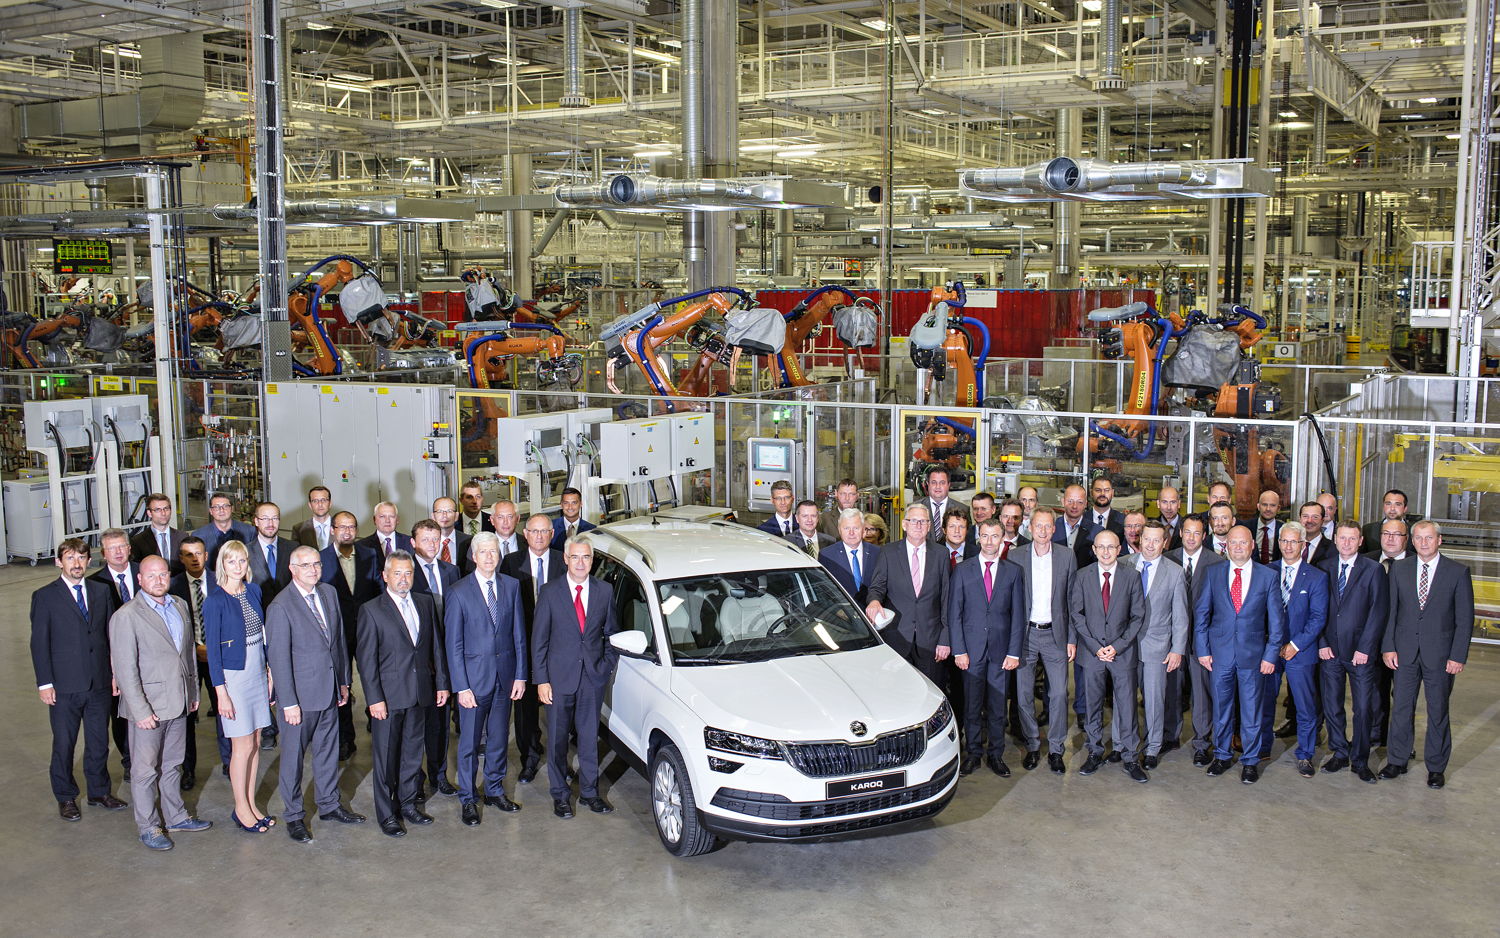 With the new KAROQ, ŠKODA is adding a compact SUV to its product range. On 26 July 2017, production of the new KAROQ began at the Kvasiny plant in East Bohemia. The first vehicles will be delivered to customers this October.